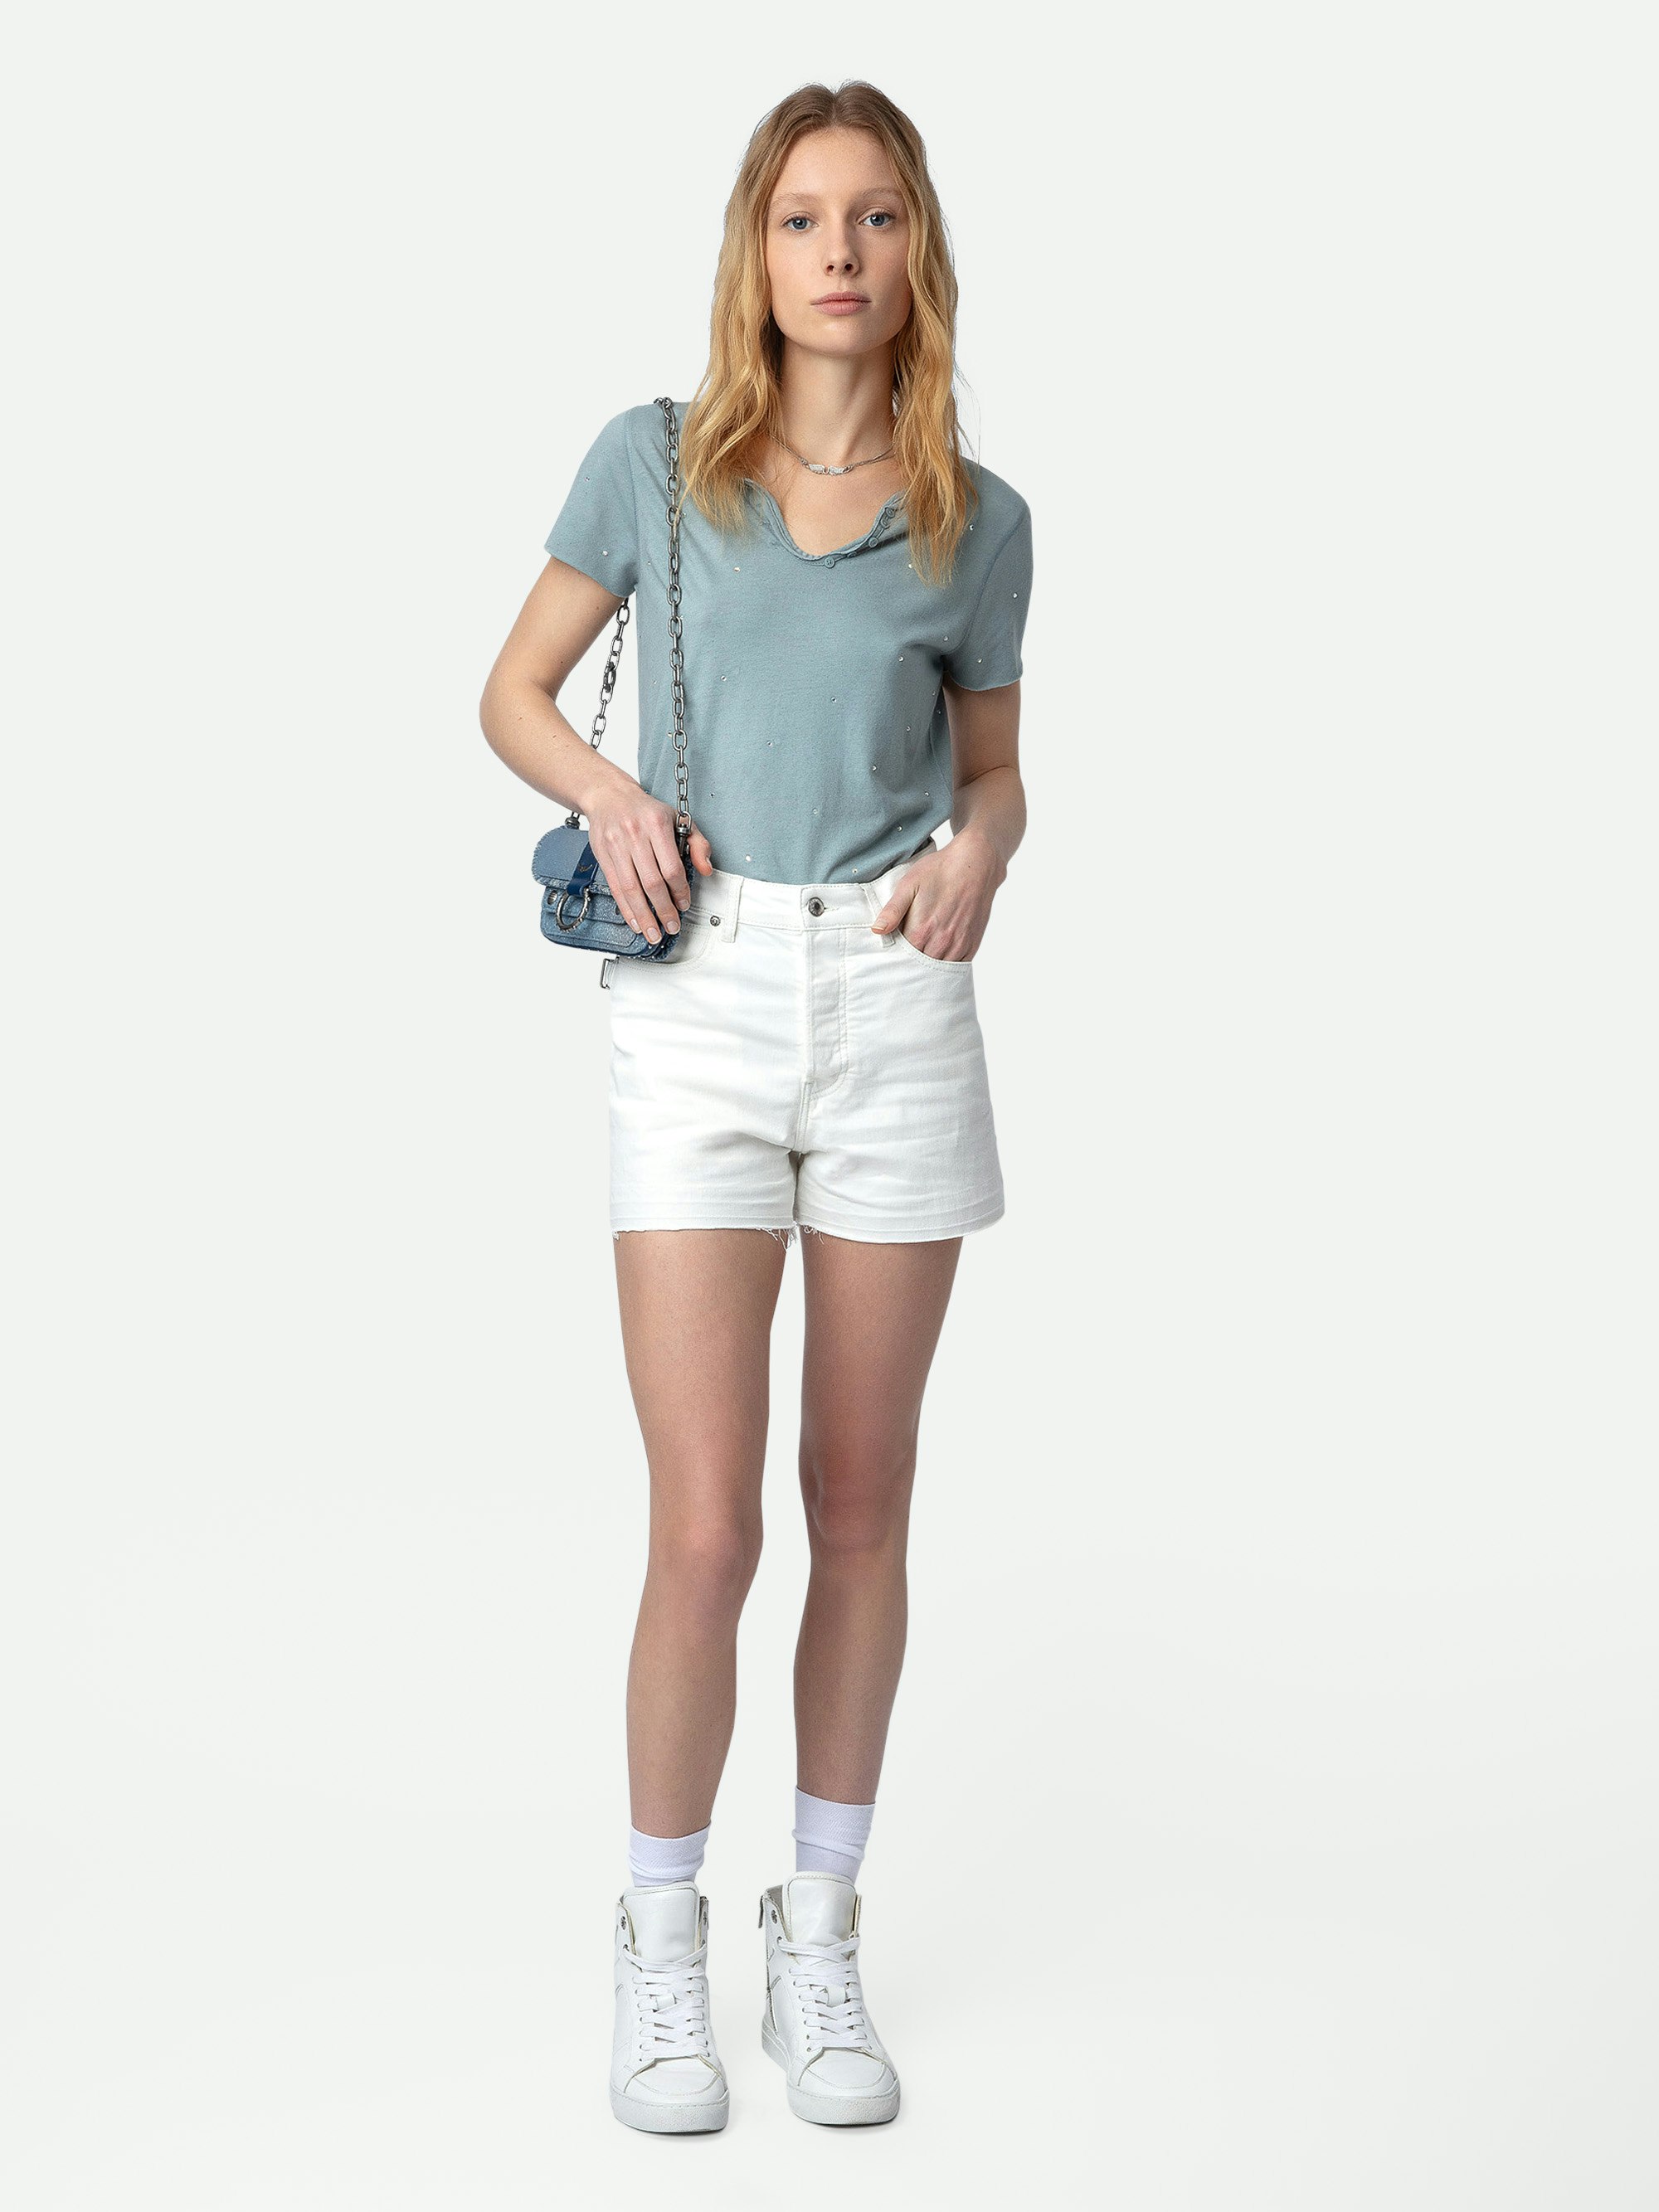 Sissi Denim Shorts - White denim shorts with pockets, overstitched details and raw hems.